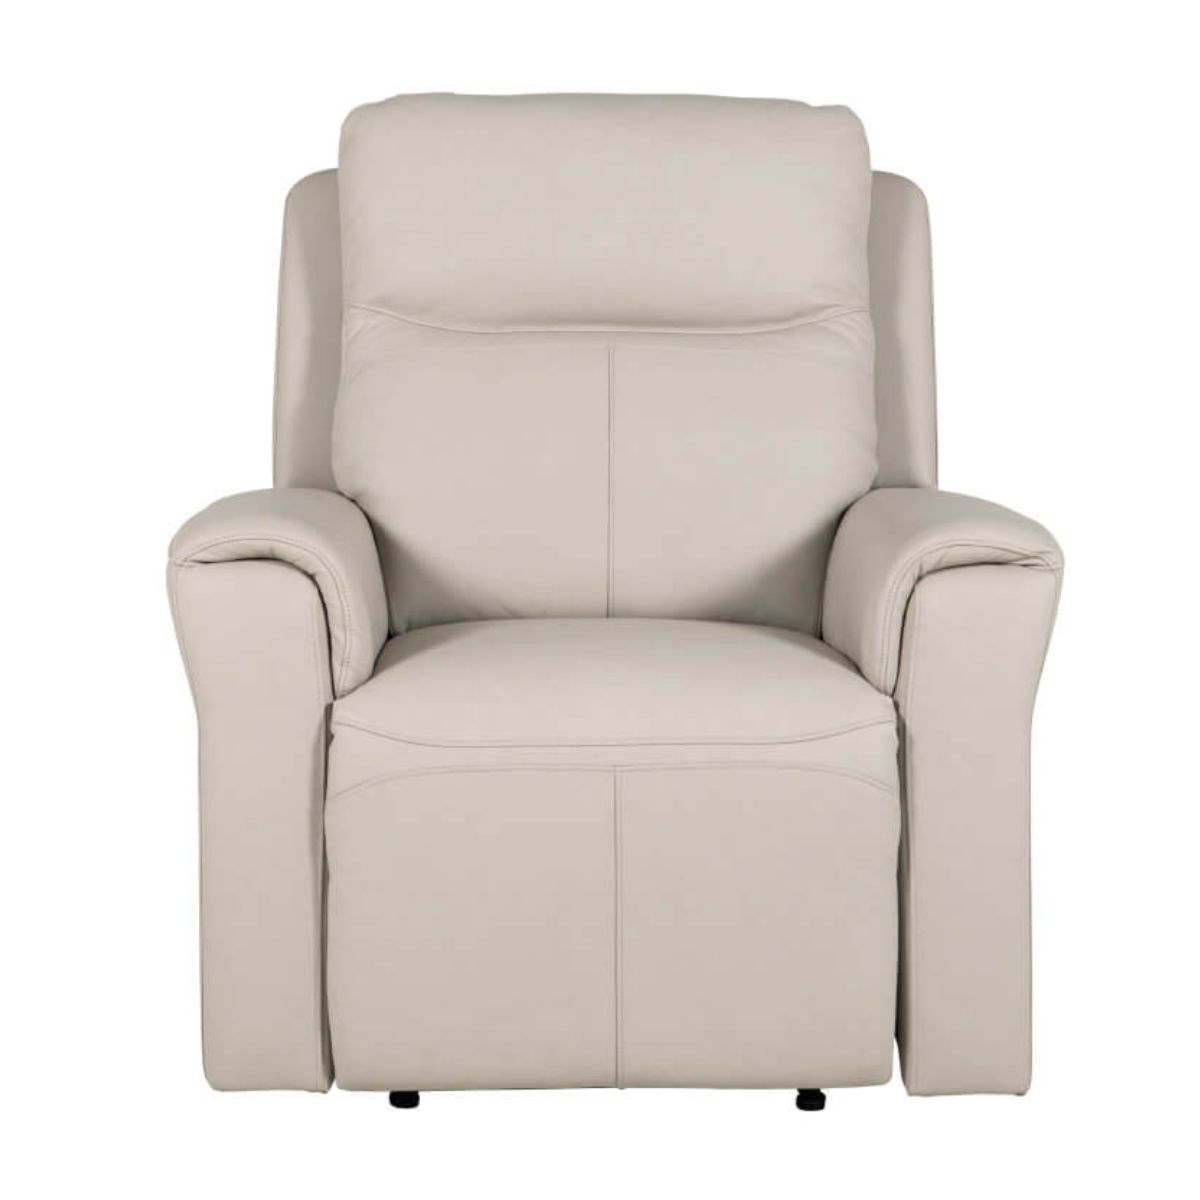 Rosslare Leather Electric Recliner Armchair Beige - 2